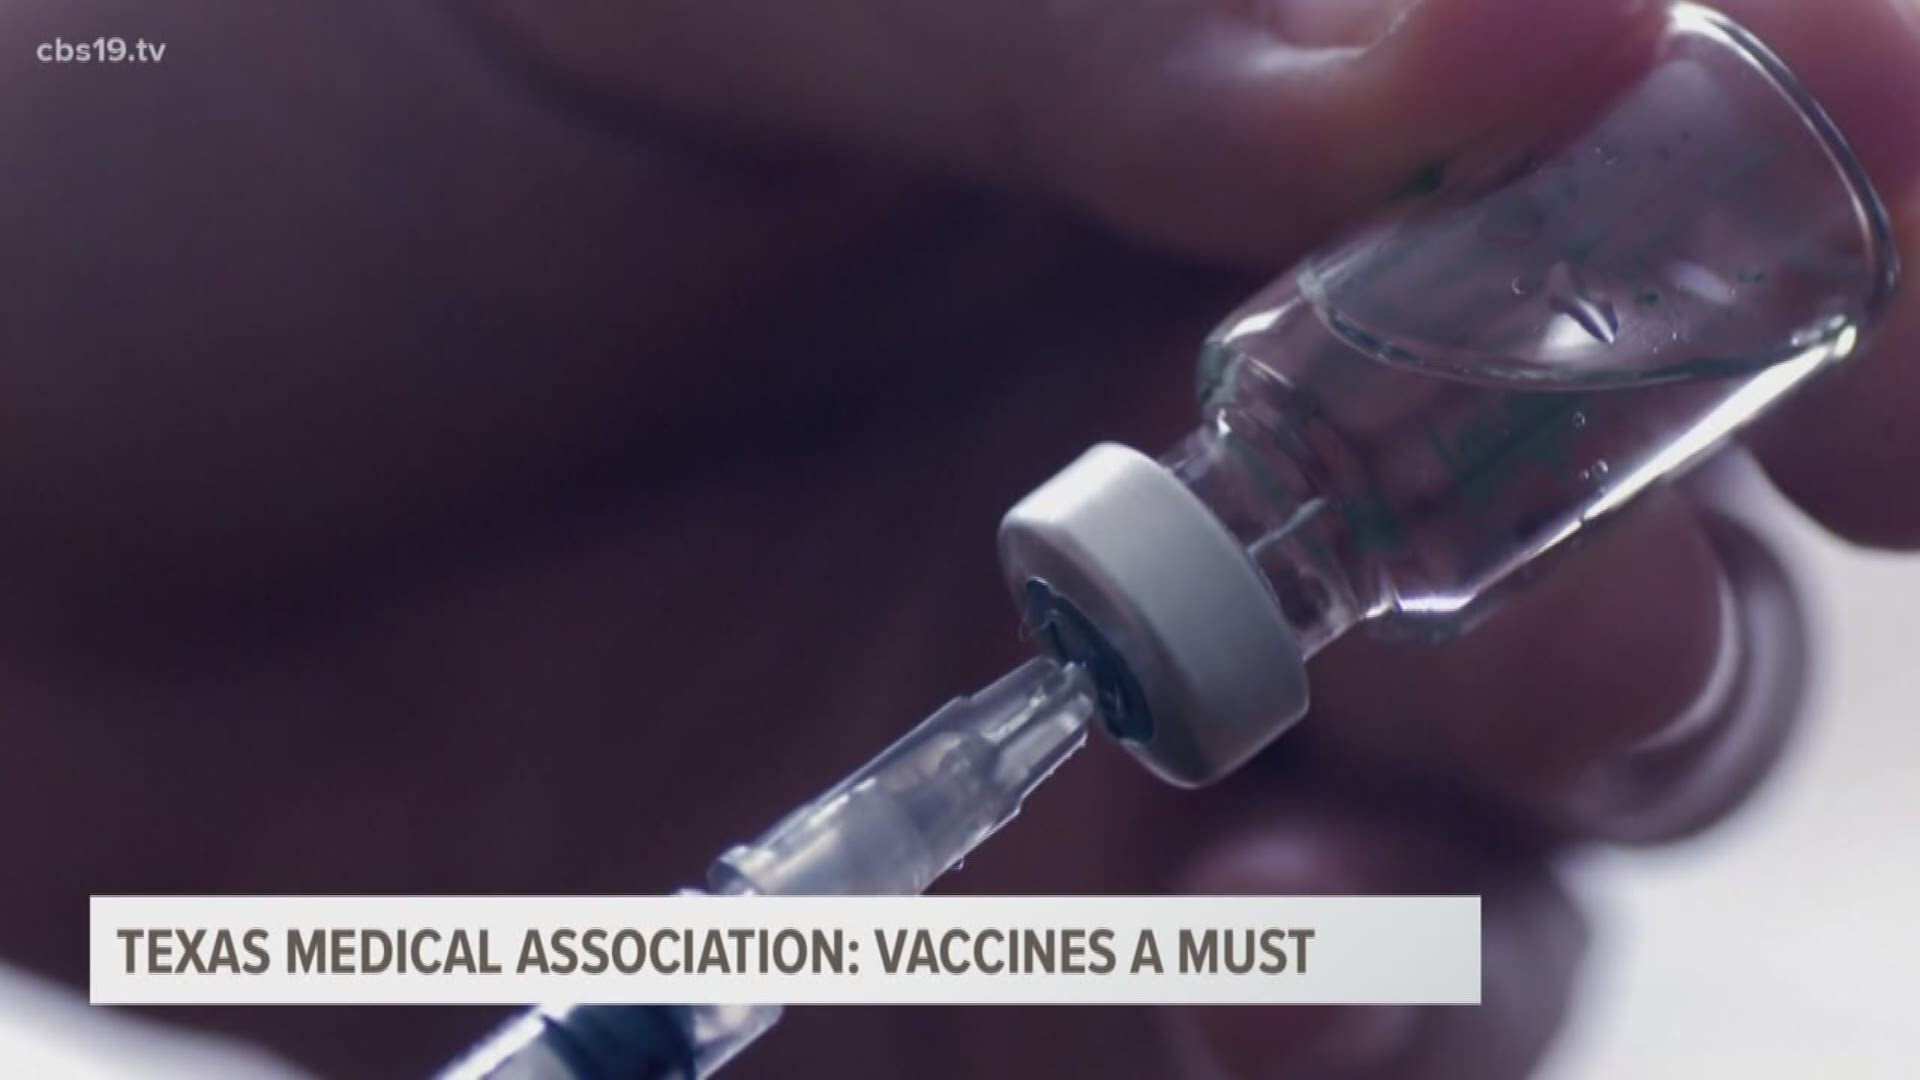 East Texas medical experts say vaccines are crucial in preventing illnesses like measles and remain a safe procedure.